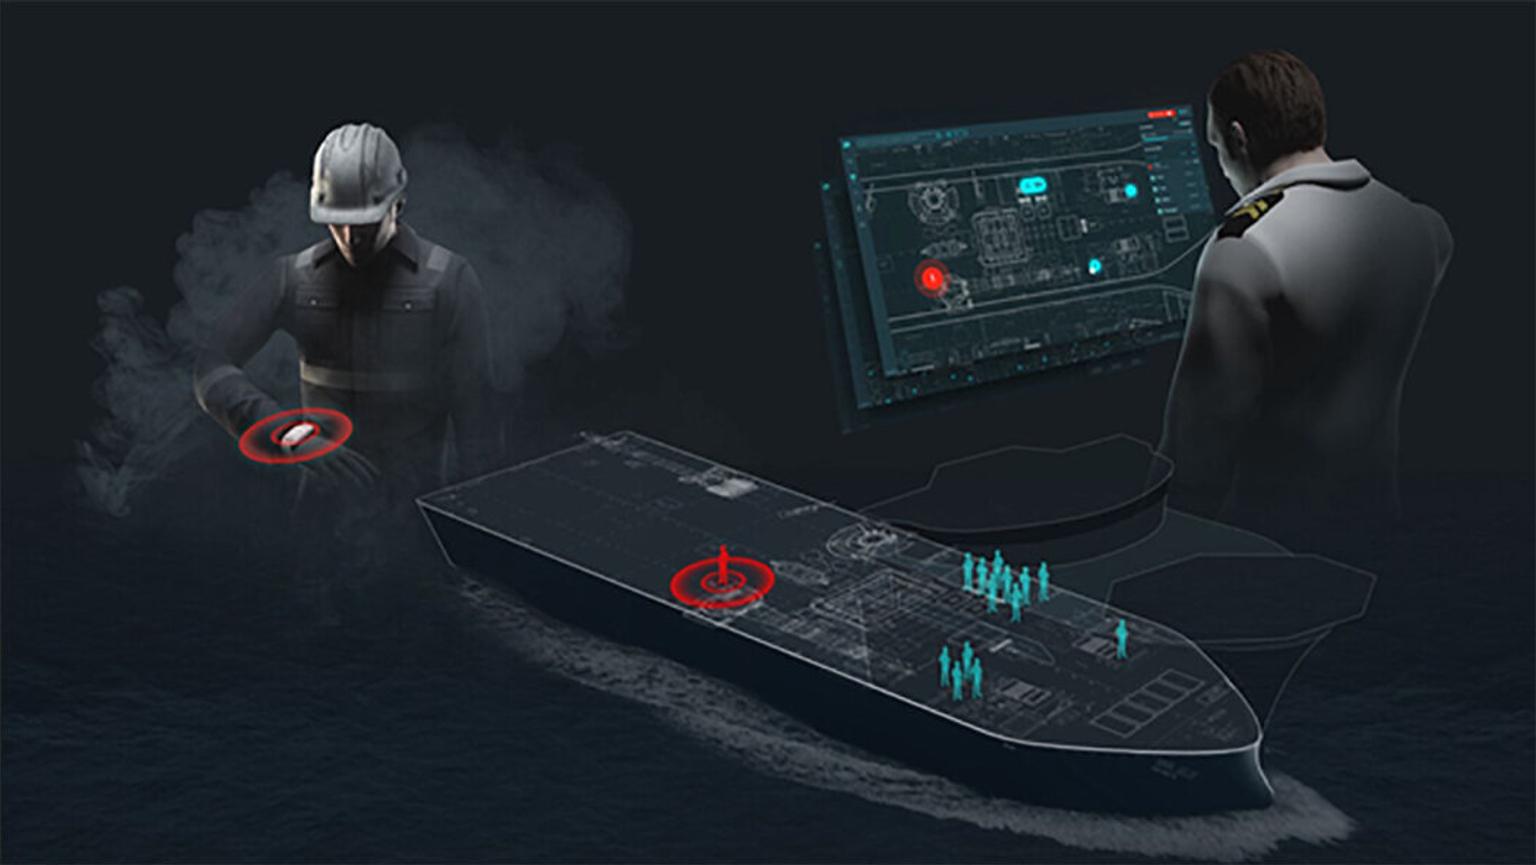 Illustrations tracking a person on board a ship